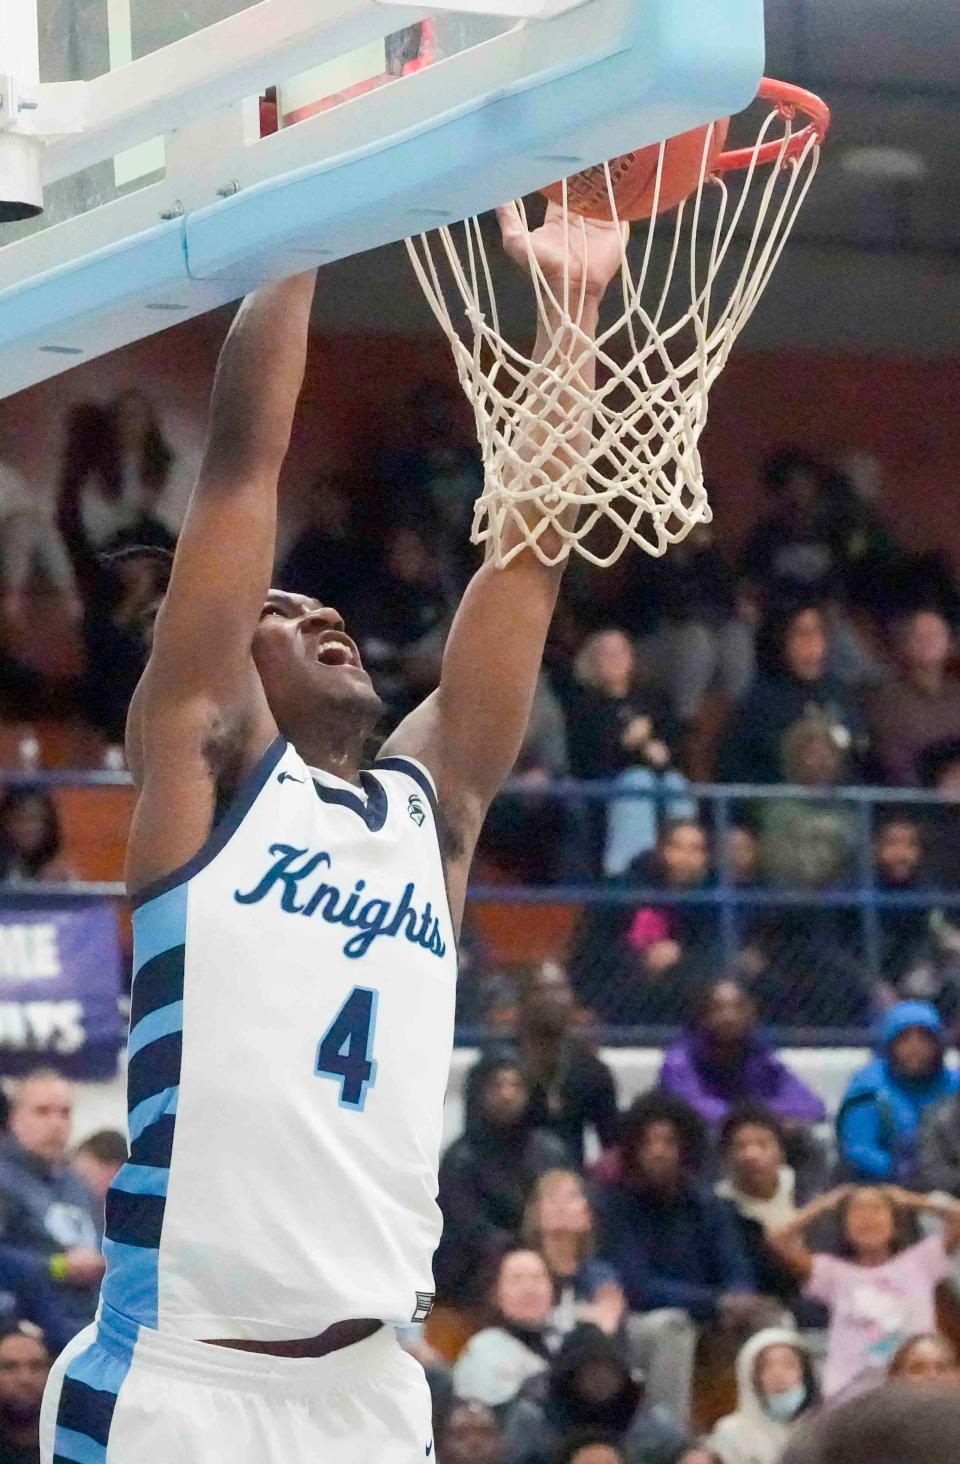 Nicolet senior Nacir Beamon (4) dunks the ball during the first half of their game Tuesday, Dec. 12, 2023, against Grafton at Nicolet High School in Glendale, Wisconsin. Ebony Cox / Milwaukee Journal Sentinel